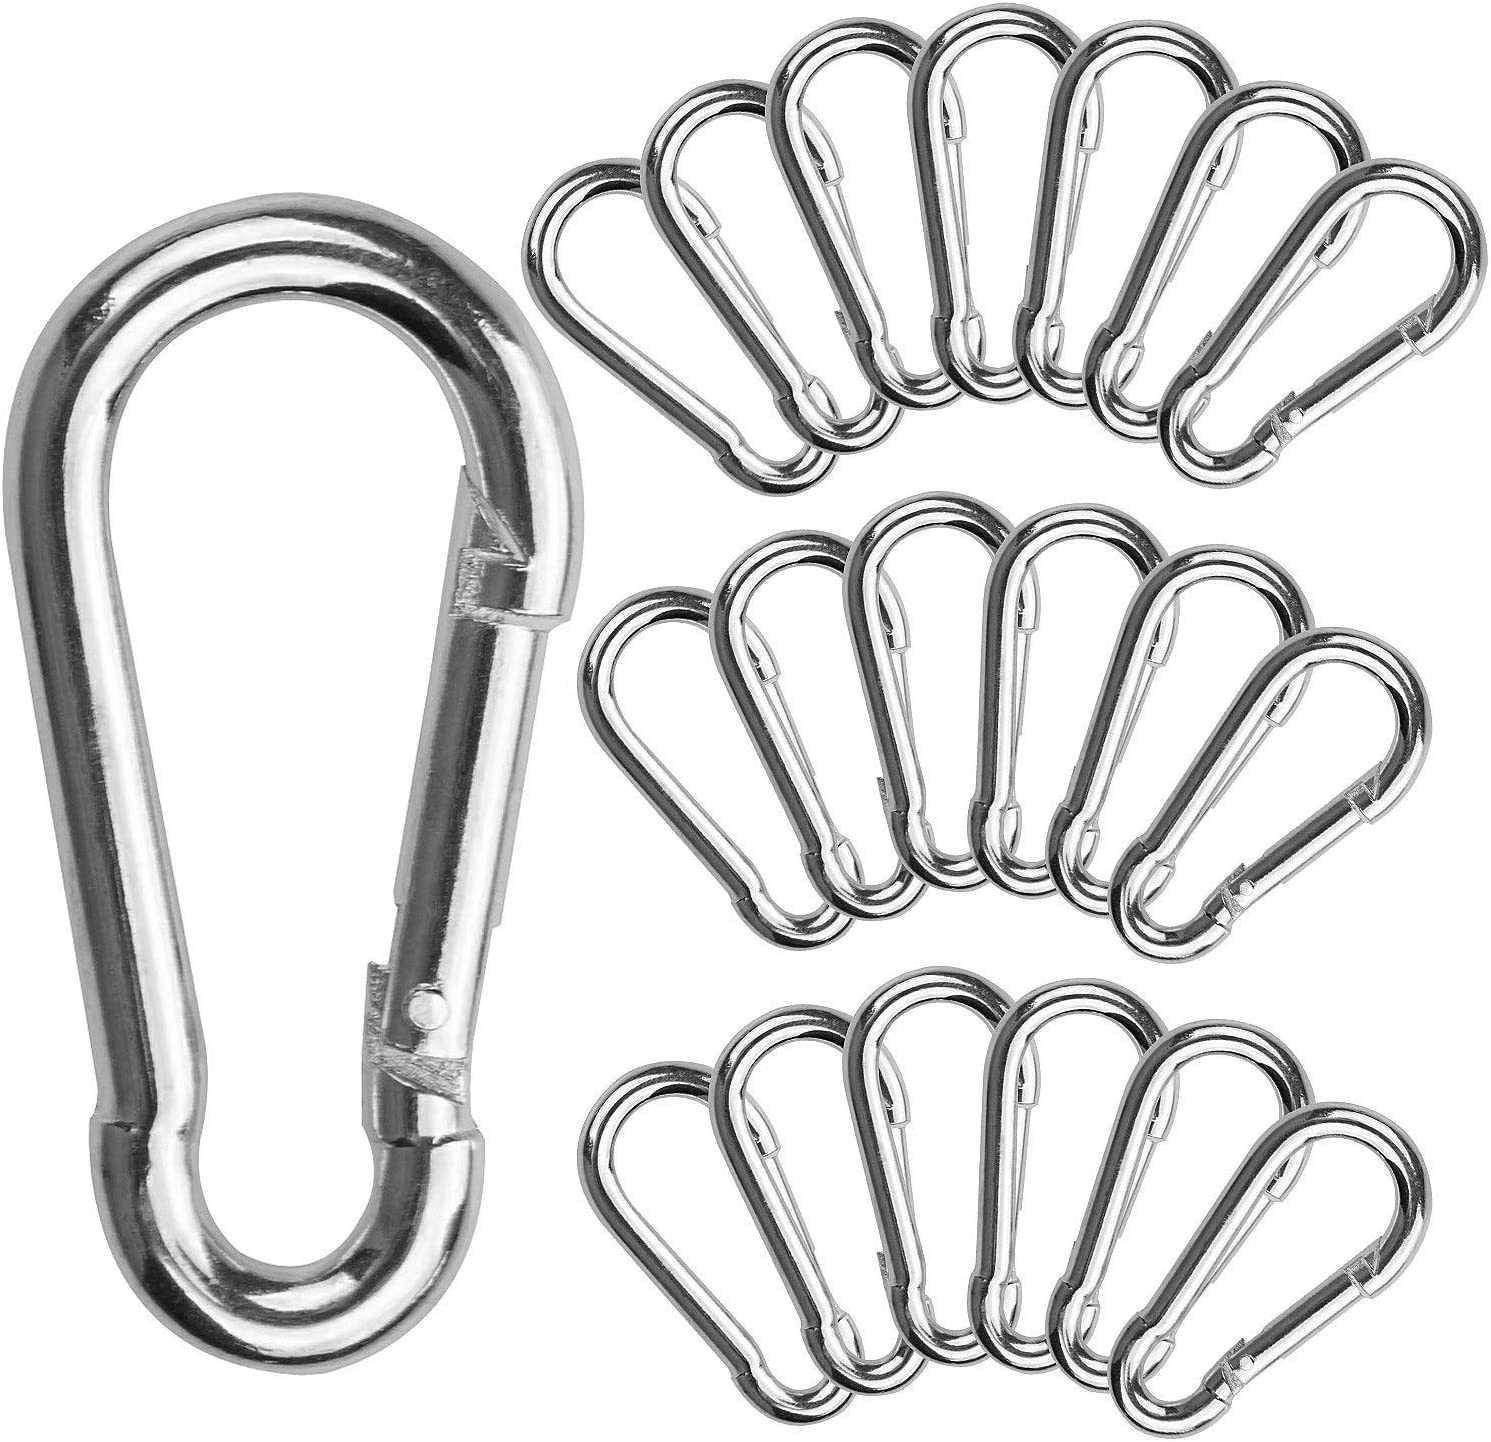 20 Pcs Small Carabiner Clip 1.57 Inch Stainless Steel Spring Snaps Hook M4  for Keys Swing Set Camping Fishing Hiking Traveling